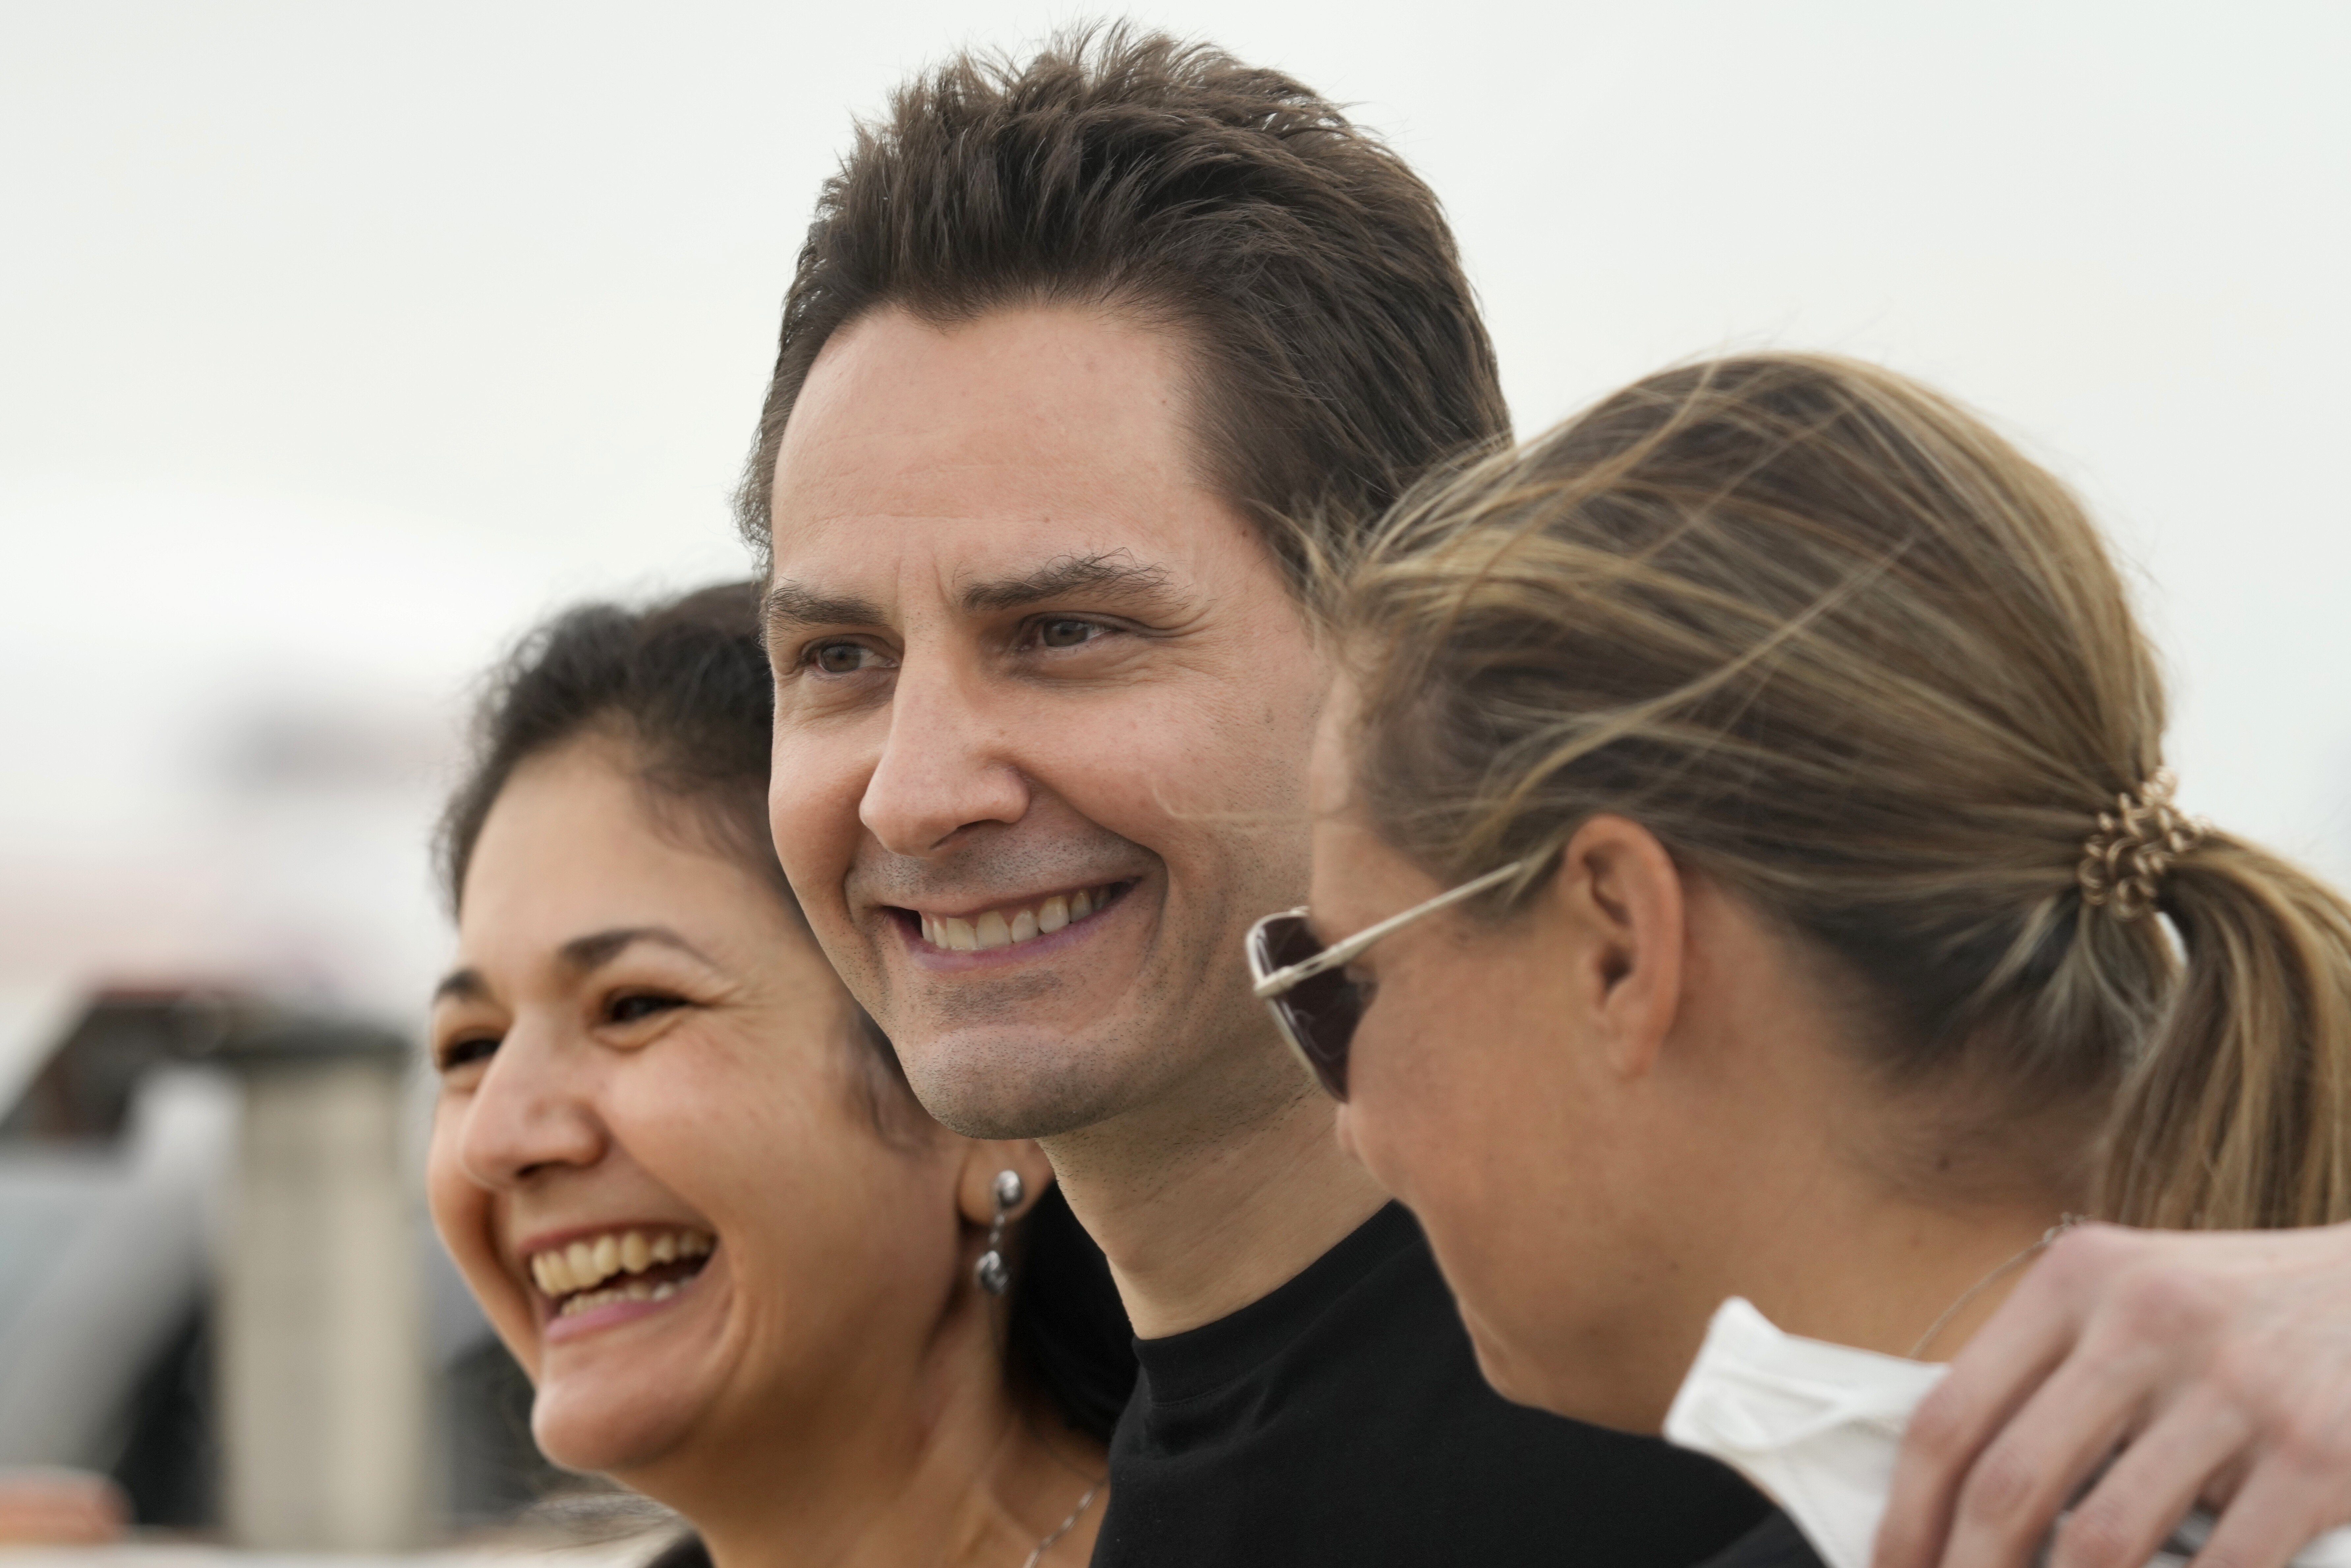 Michael Kovrig embraces his wife Vina Nadjibulla, left, and sister Ariana Botha after arriving at Pearson International Airport in Toronto on September 25. Photo: The Canadian Press via AP